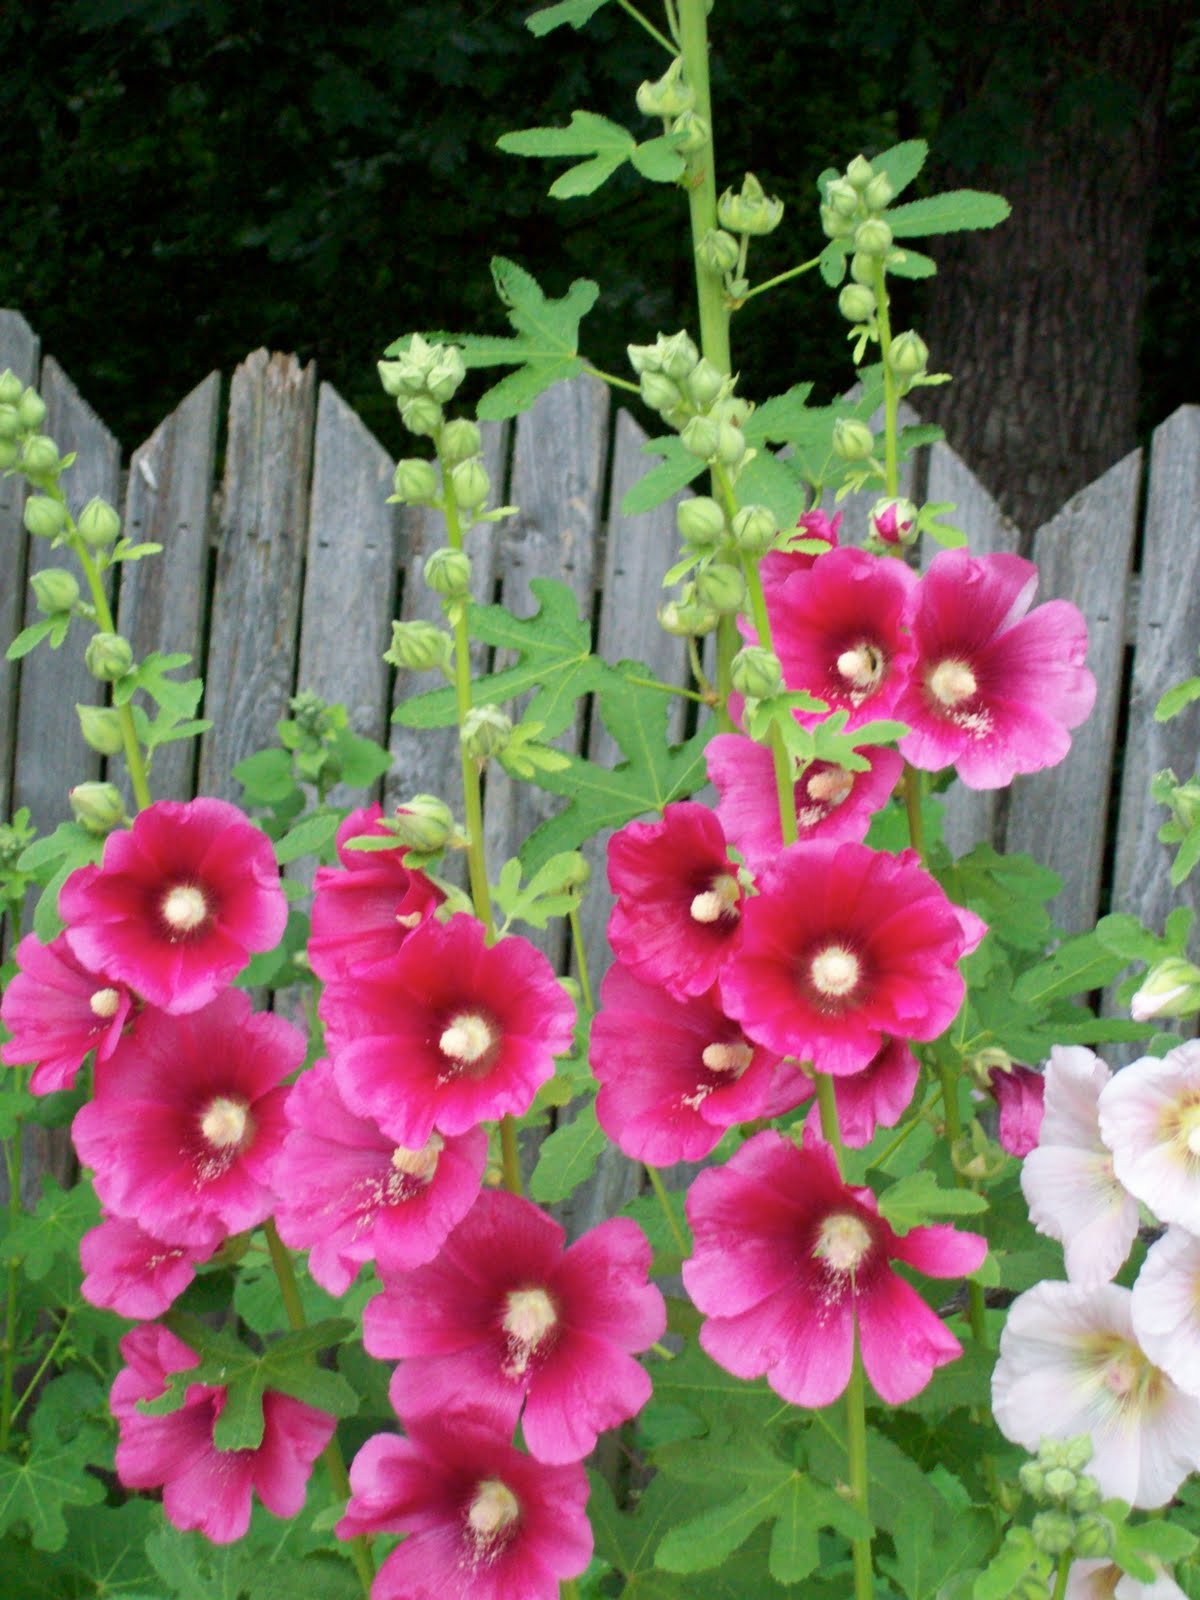 Can I Be Pretty in Pink: Holly Hocks Seeds